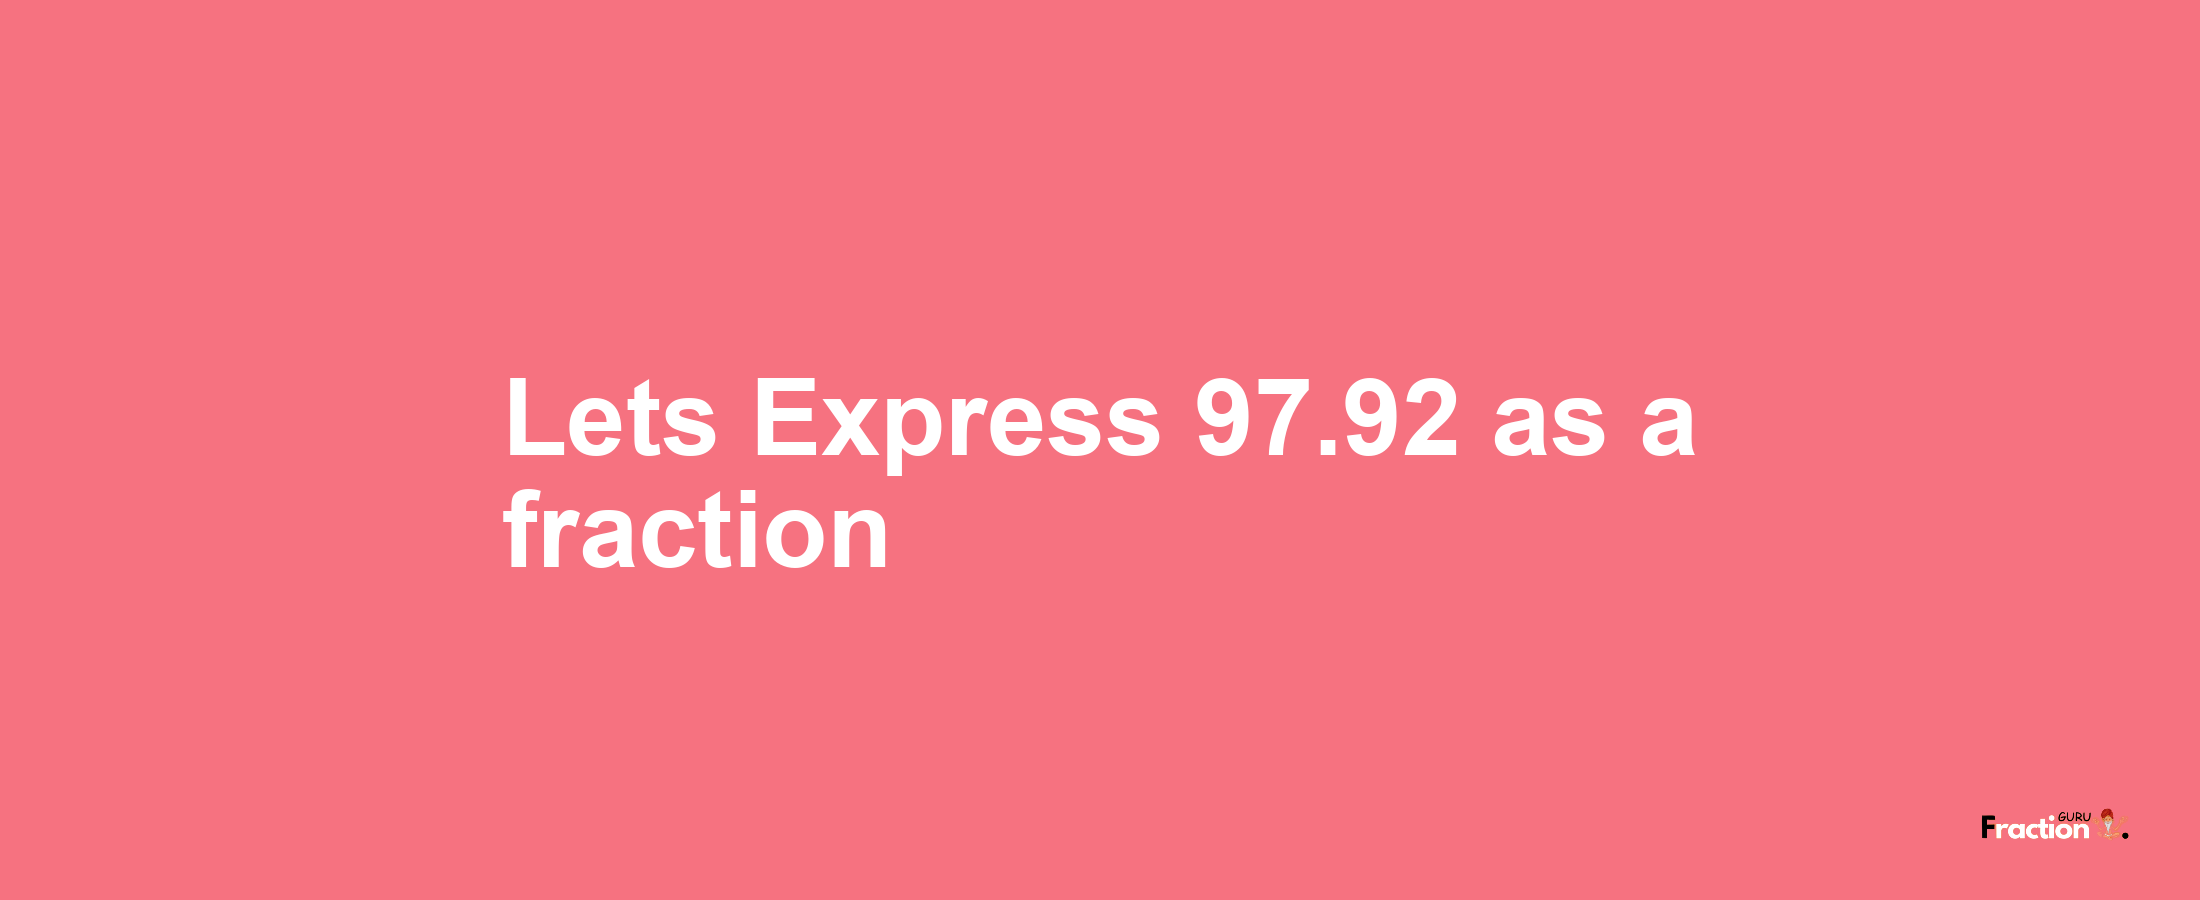 Lets Express 97.92 as afraction